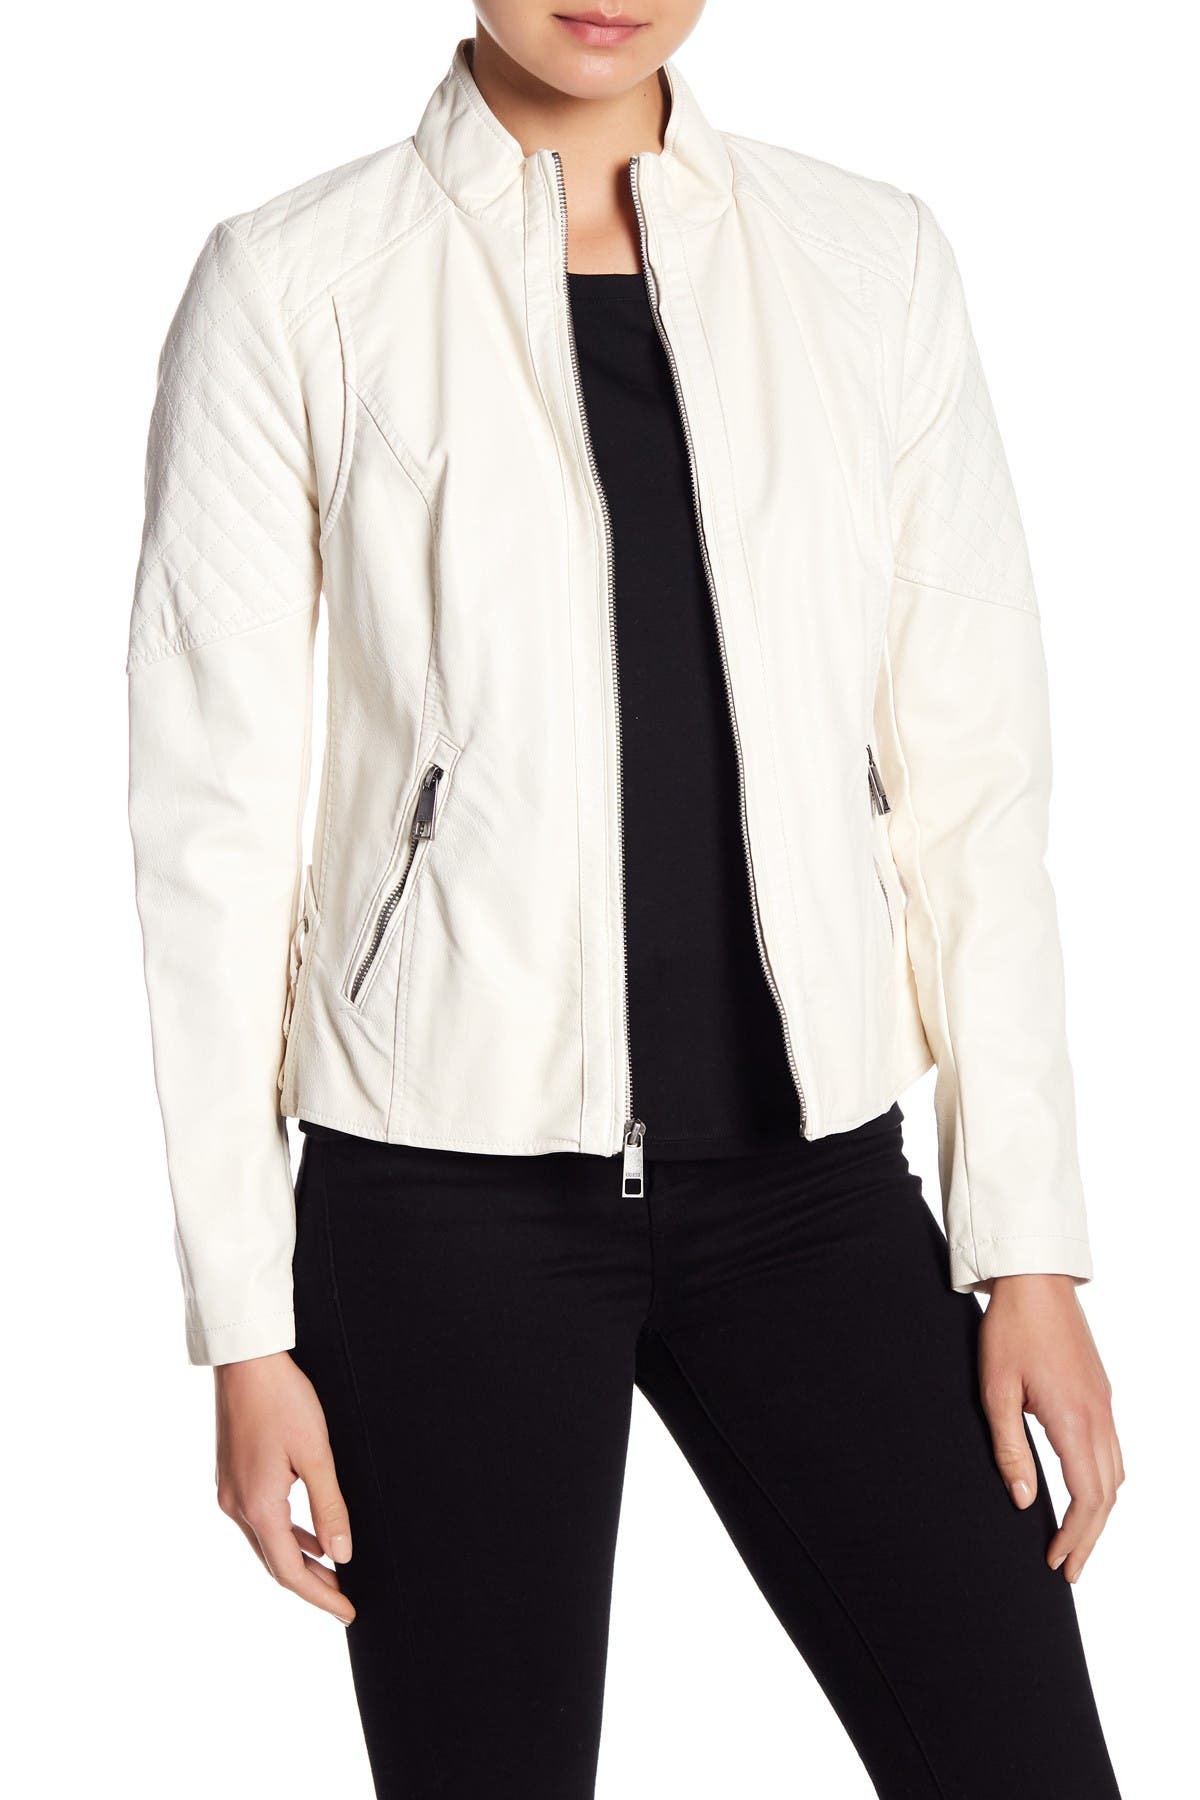 Guess Faux Leather Jacket In White